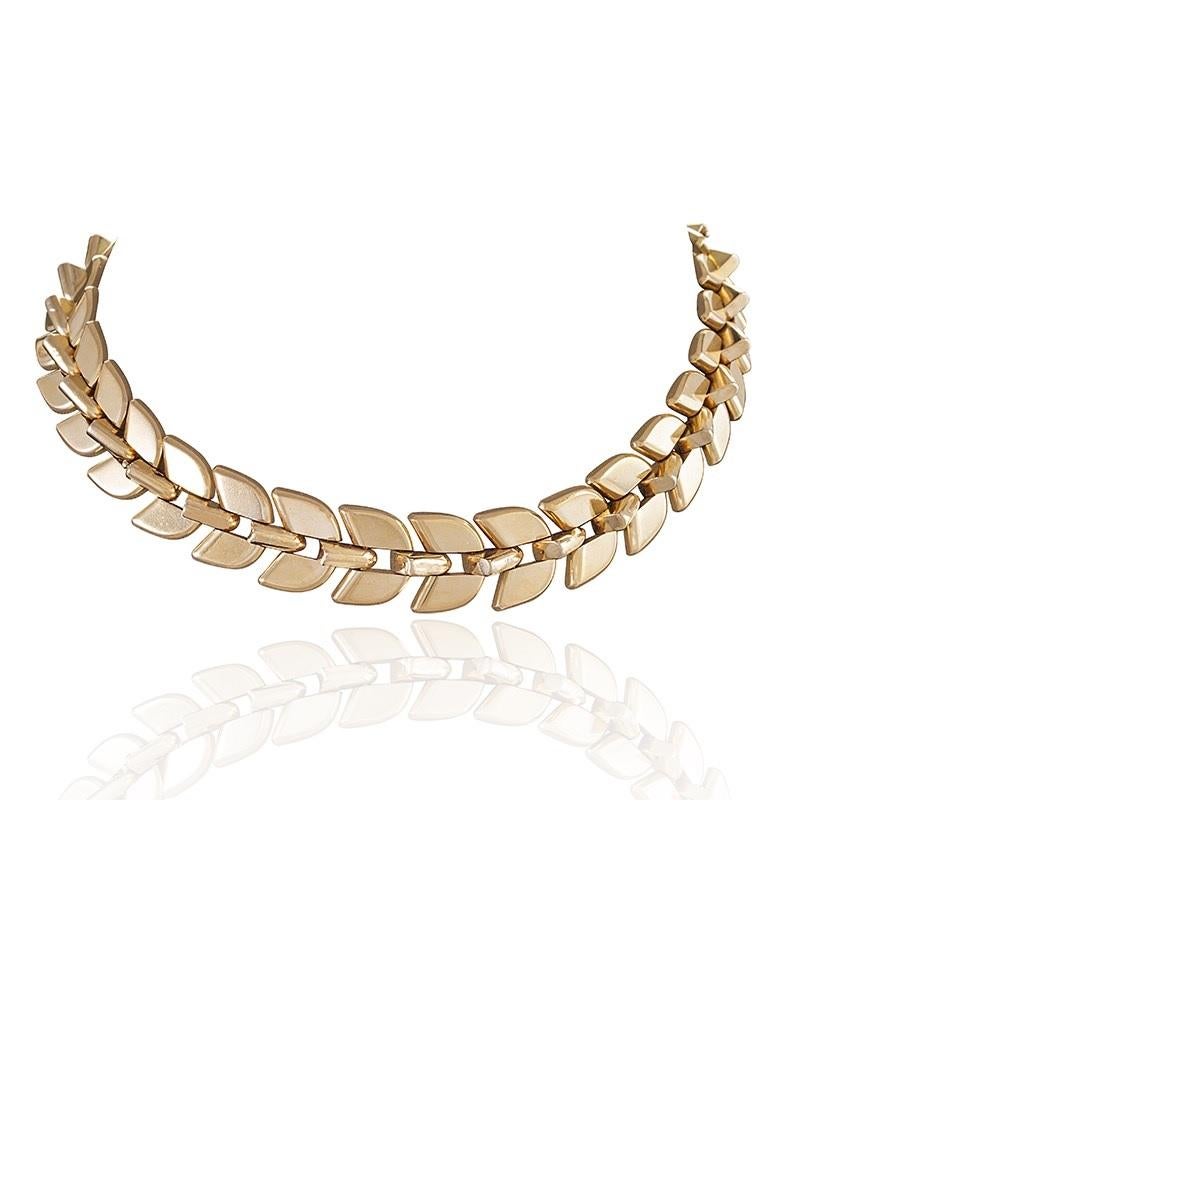 A French mid-20th century 18 karat gold necklace by Frederic Boucheron. The necklace, which elegantly and seamlessly breaks apart into two wearable bracelets, is comprised of highly polished rounded triangular section links, with two mirroring